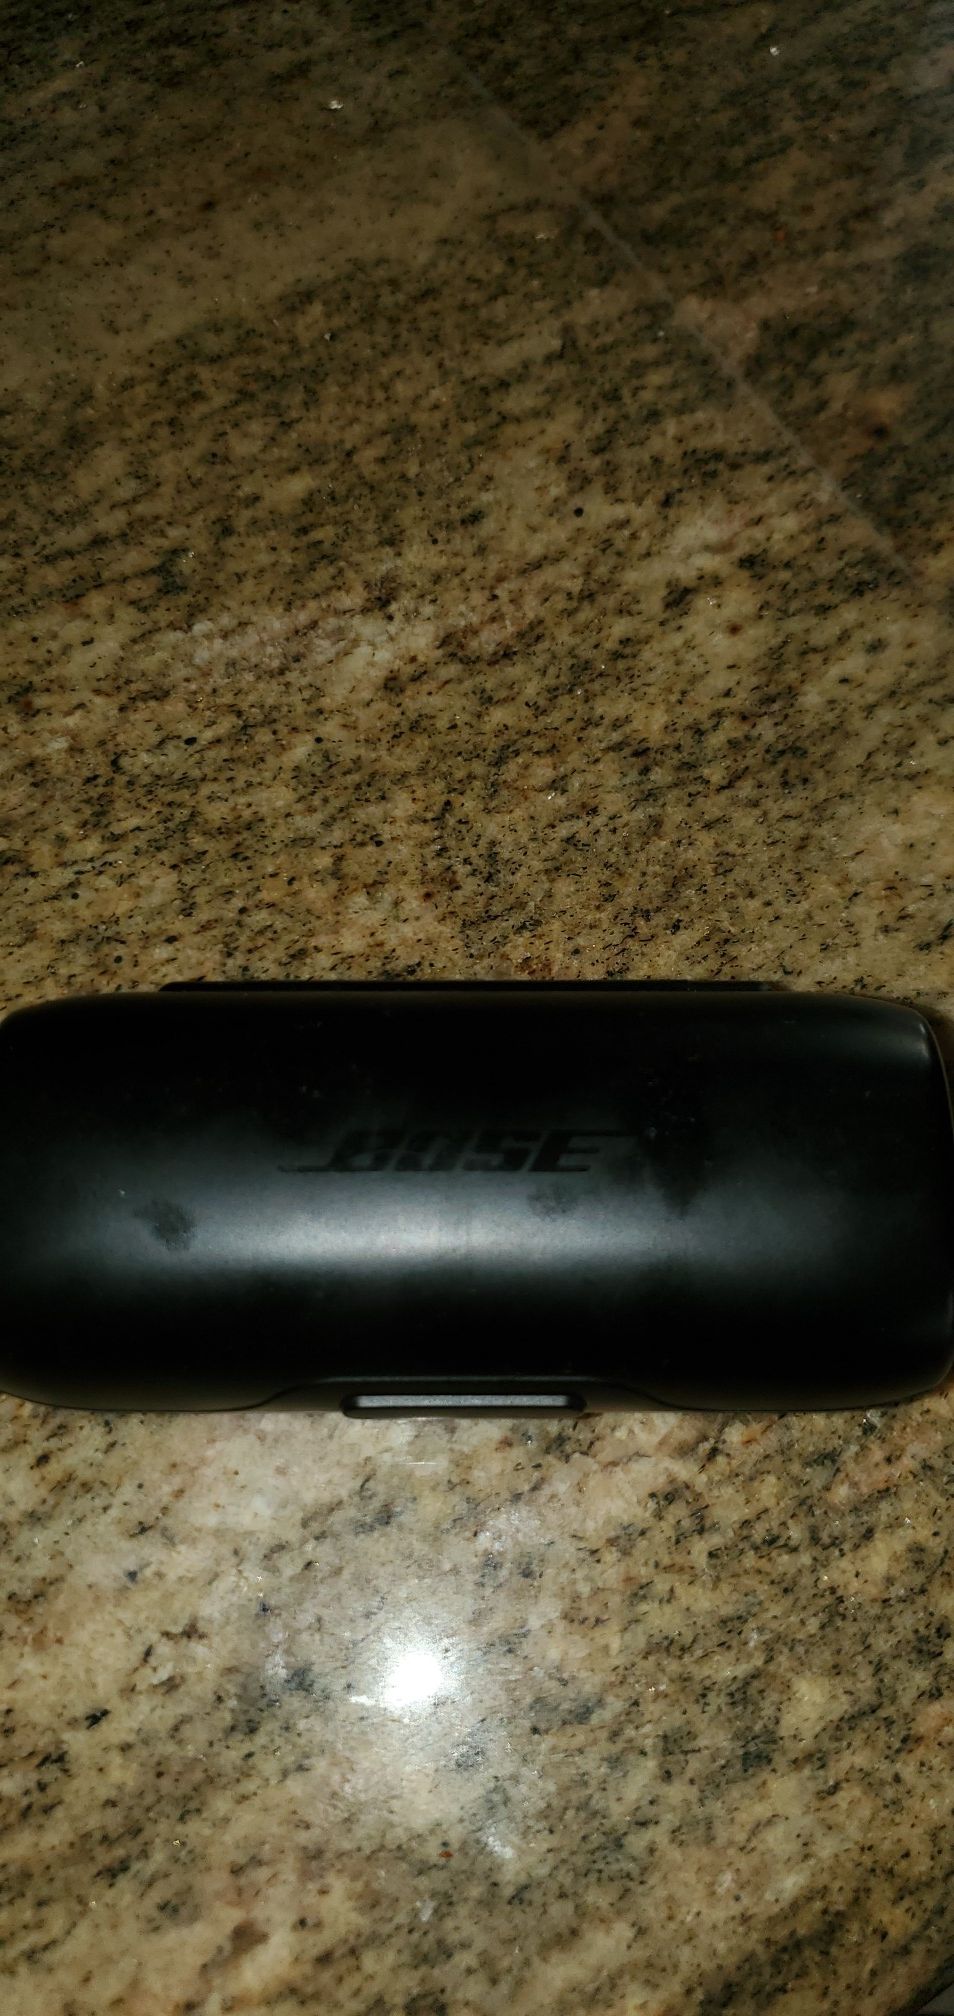 Bose ear buds charger